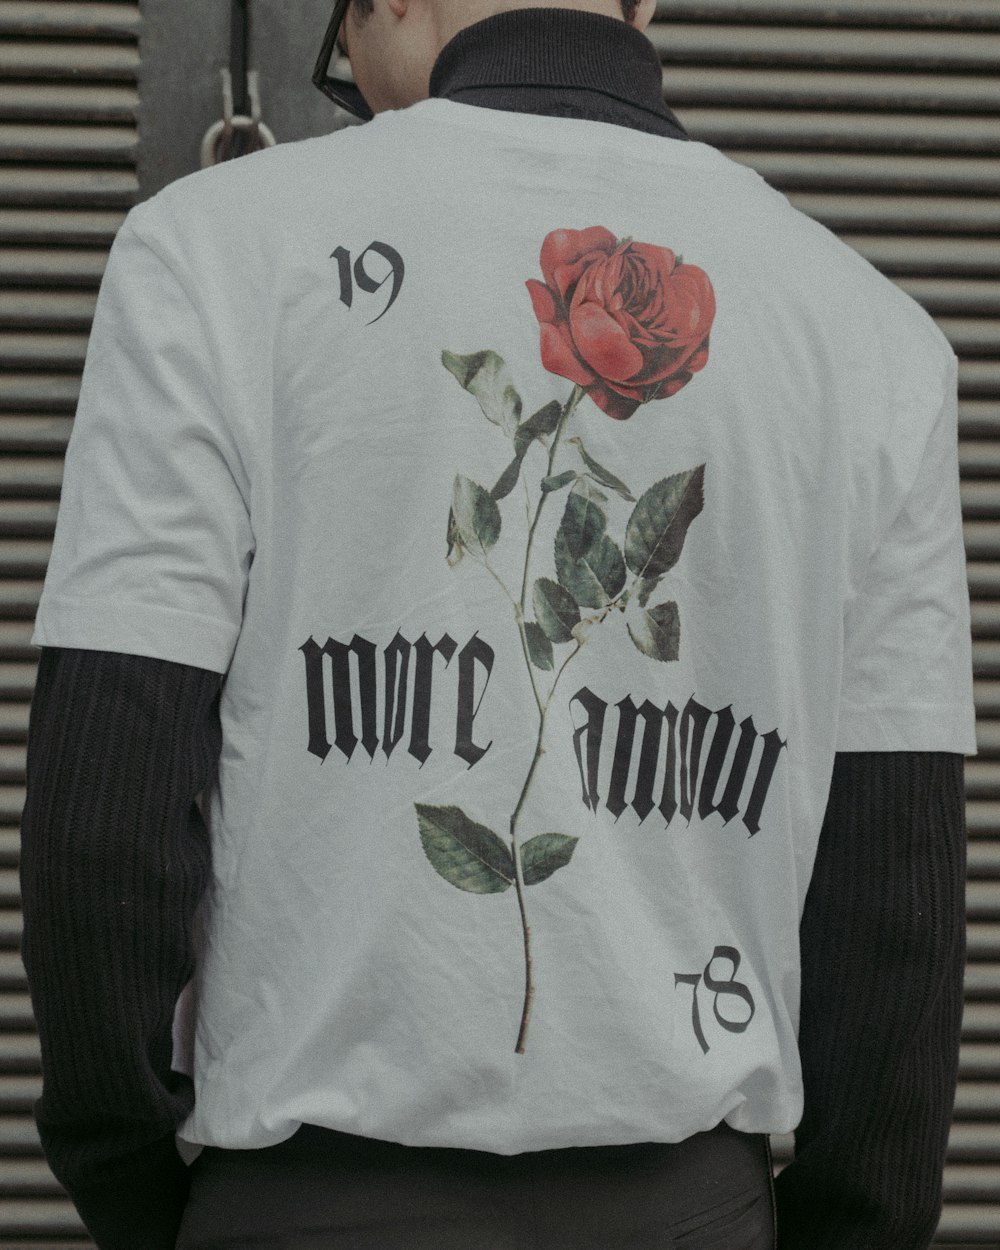 white and red rose printed crew neck t-shirt